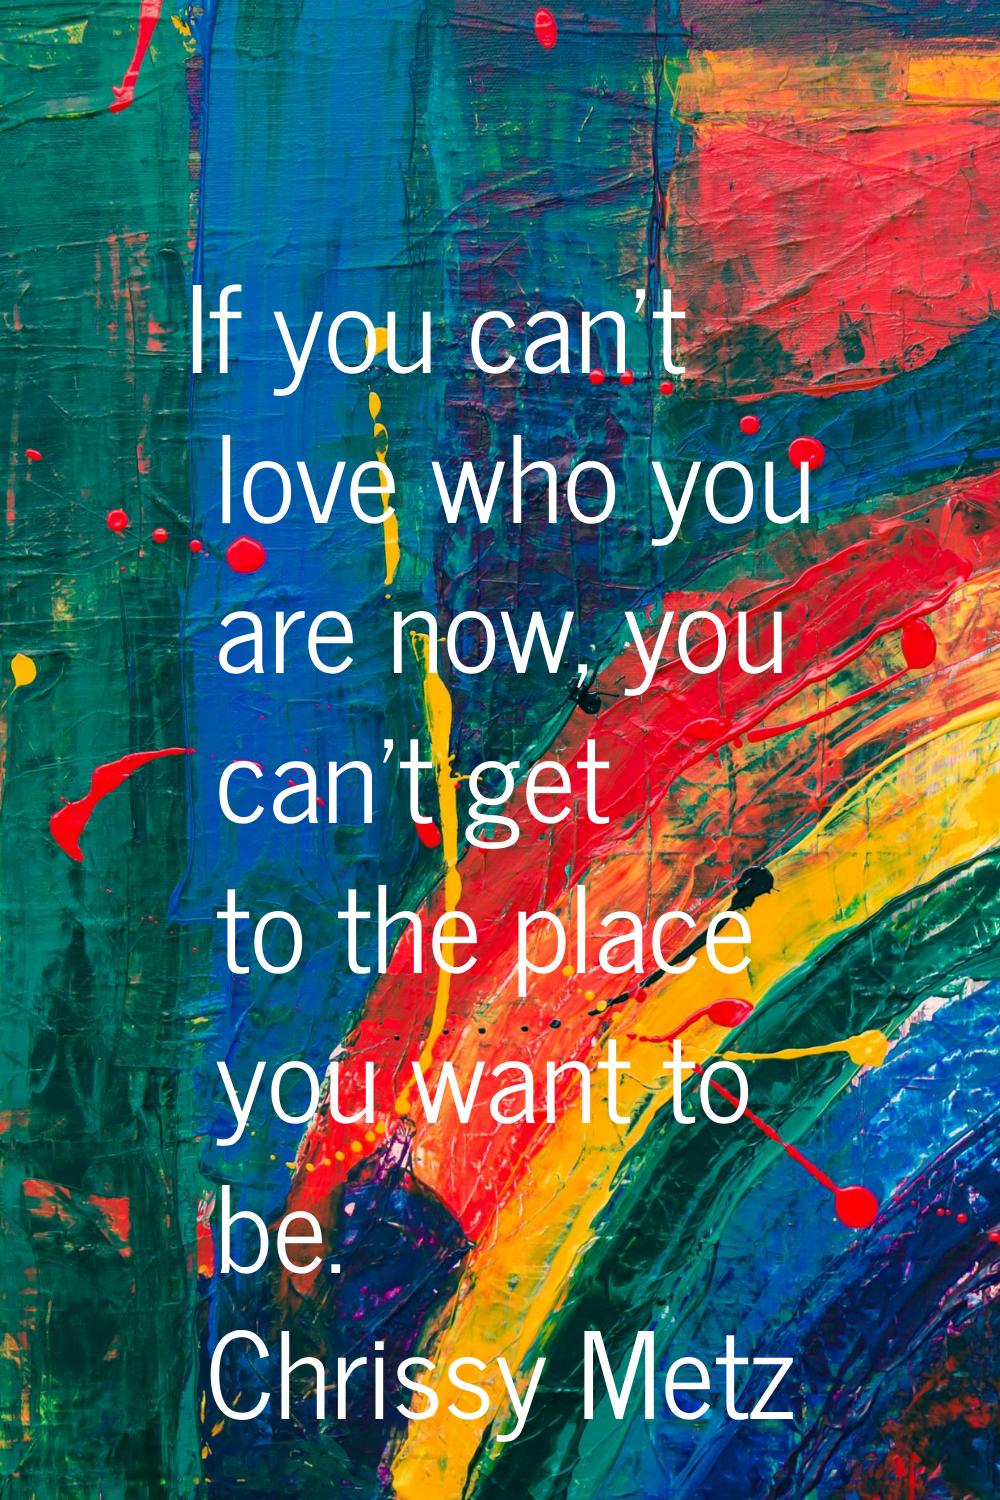 If you can't love who you are now, you can't get to the place you want to be.